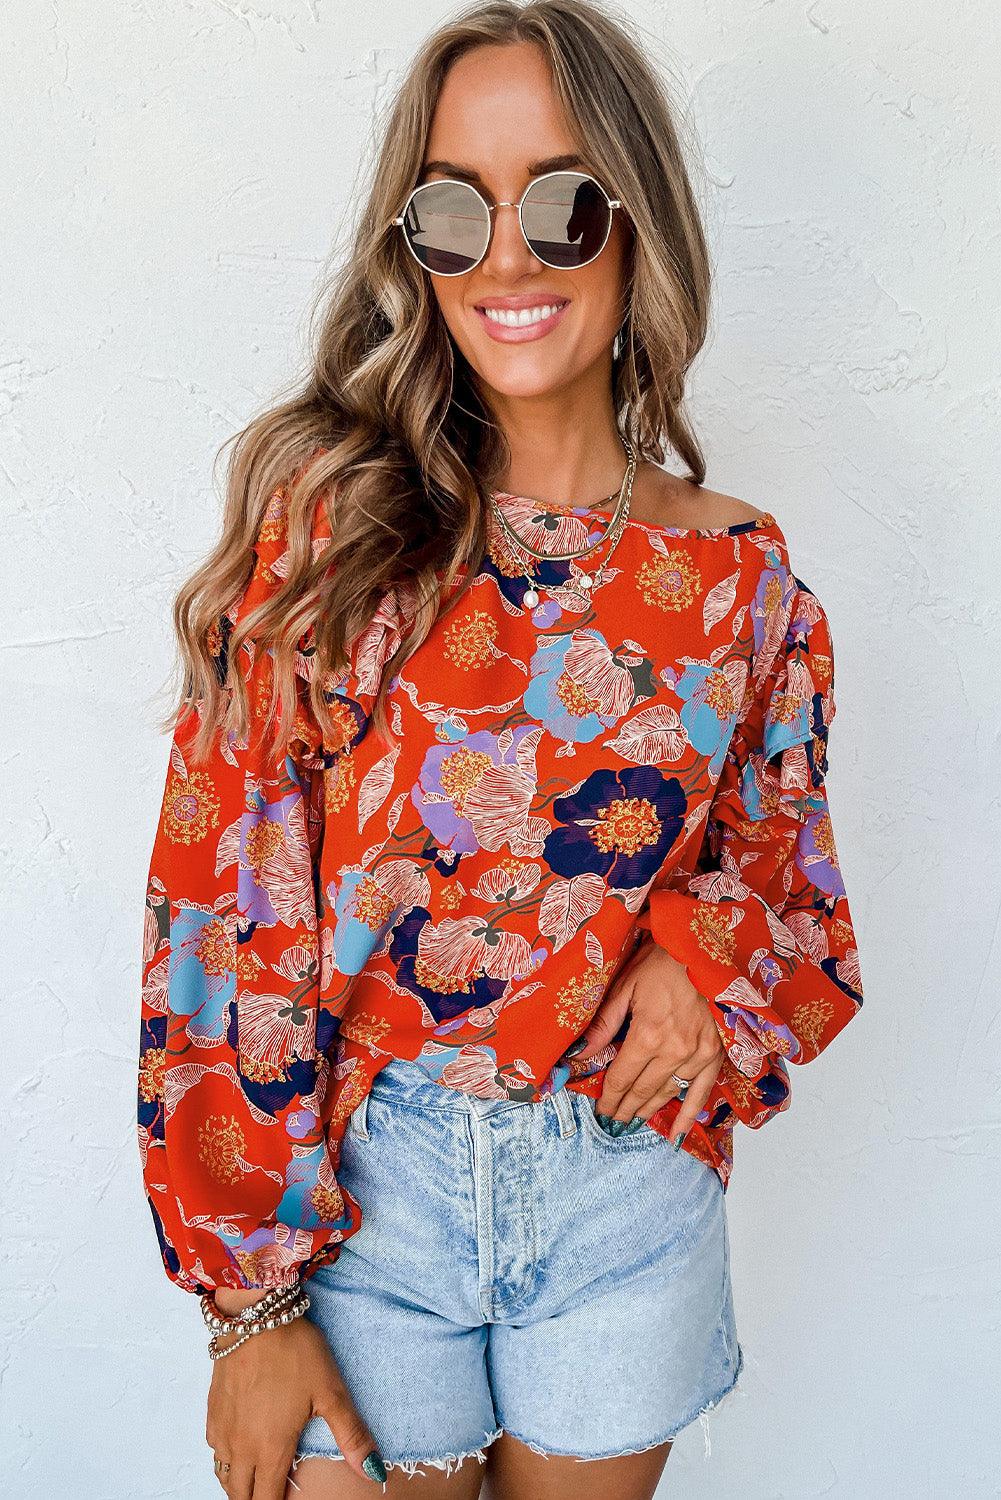 Red Floral Print Ruffle Puff Sleeve Blouse - L & M Kee, LLC